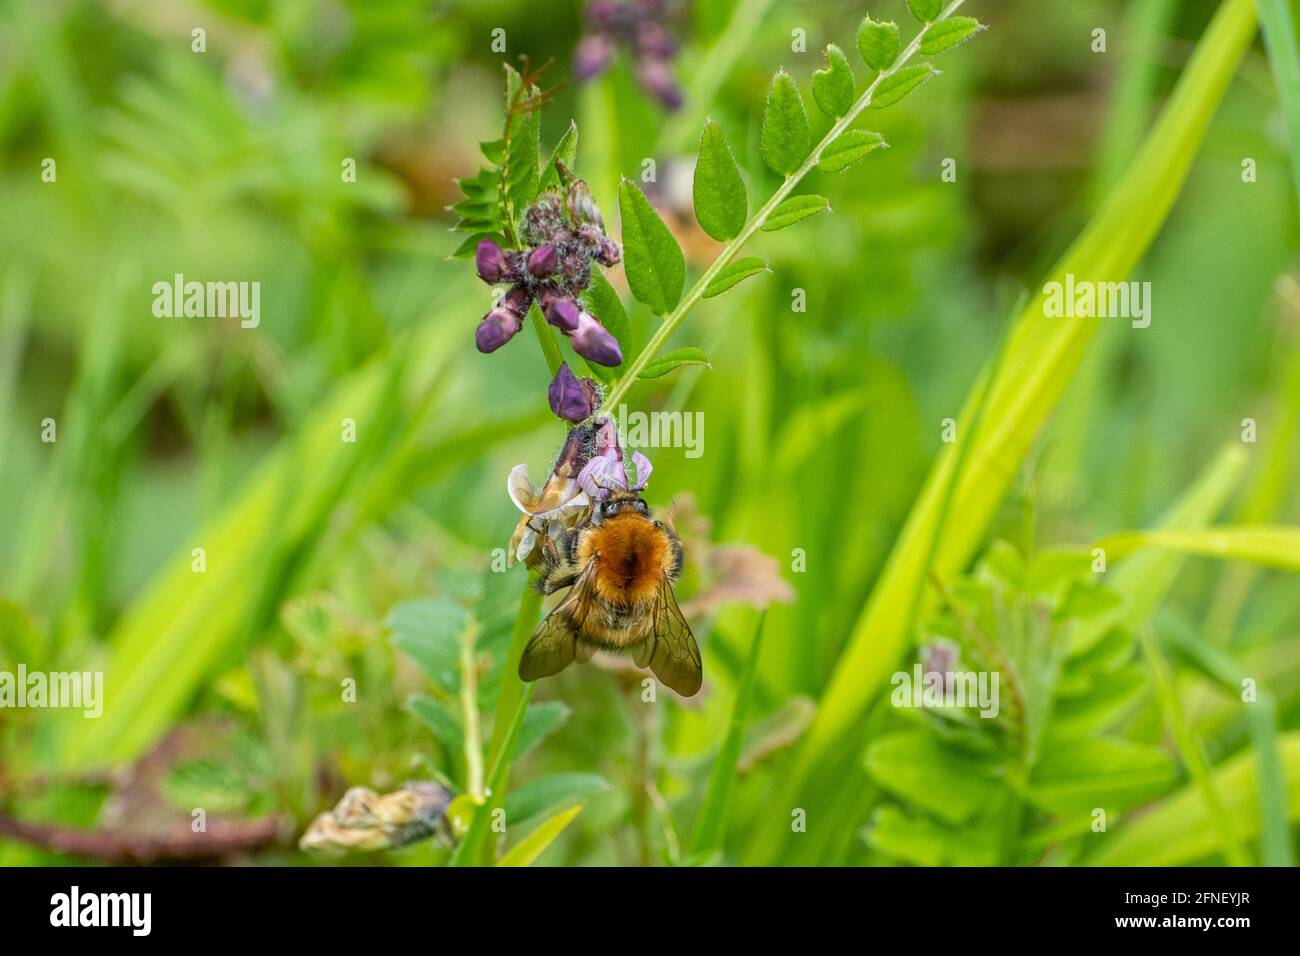 Common carder bee (Bombus pascuorum) feeding on nectar from bush vetch wildflowers (Vicia sepium) during May or Spring, UK Stock Photo